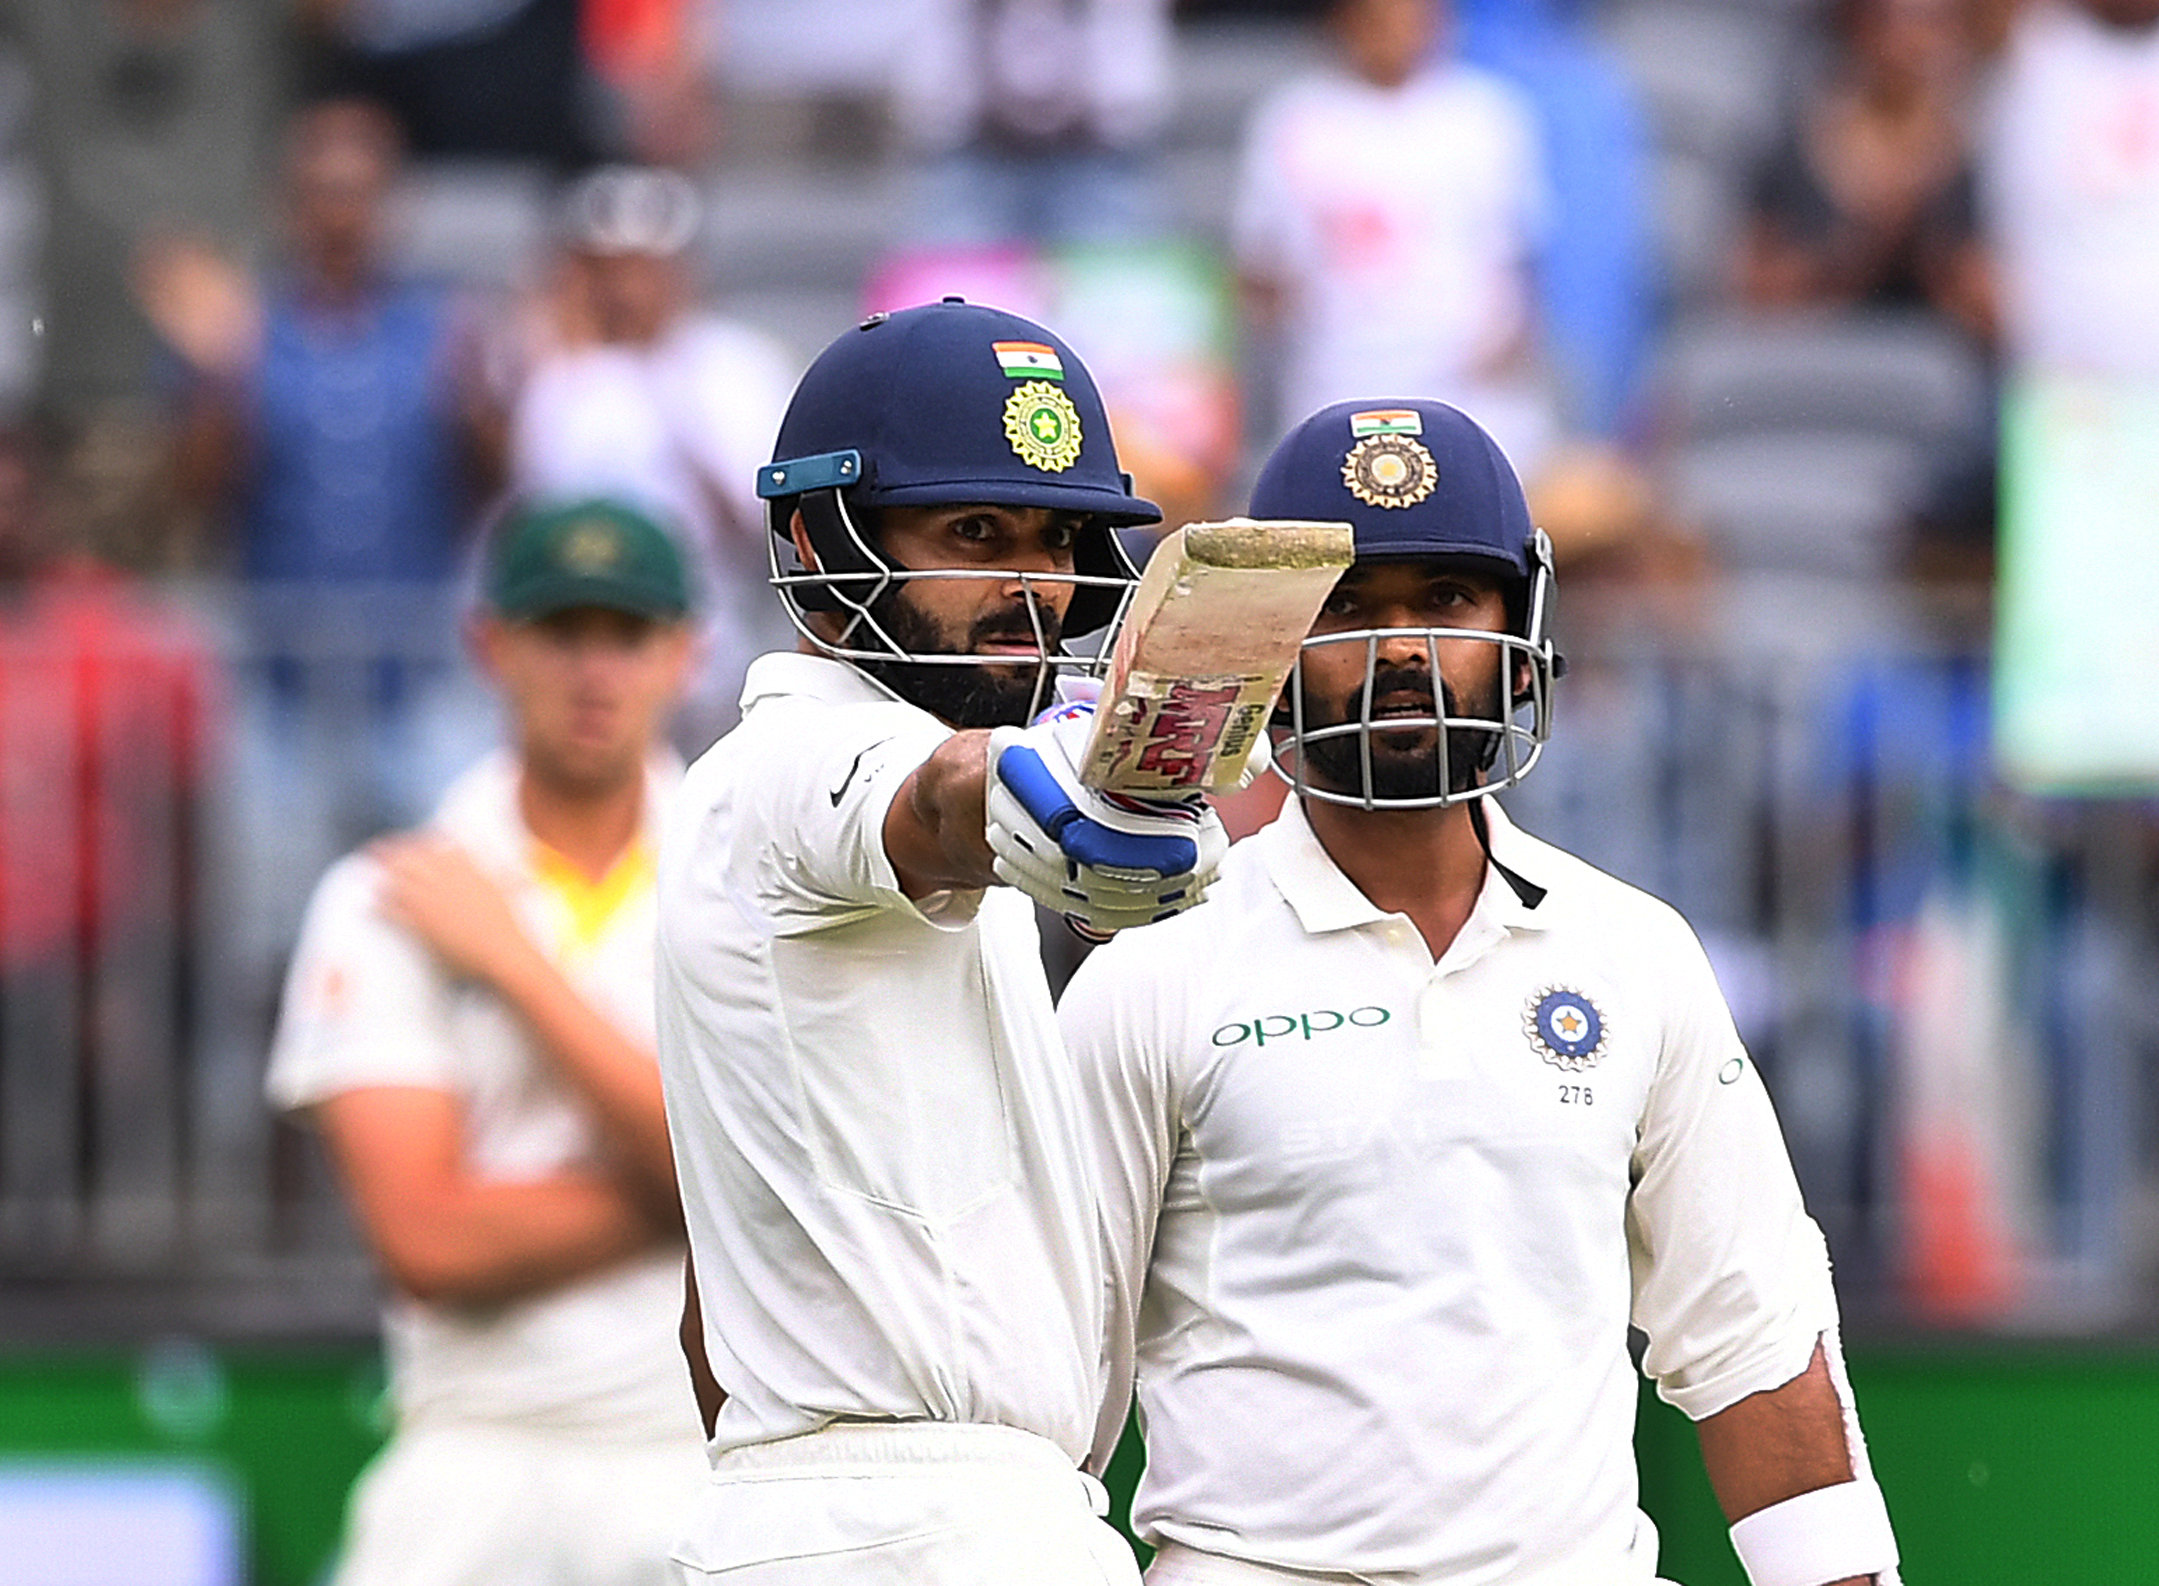 India's captain Virat Kohli raises his bat after scoring his half century on day two of the second test match between Australia and India at Perth Stadium in Perth, Australia, December 15, 2018. Reuters